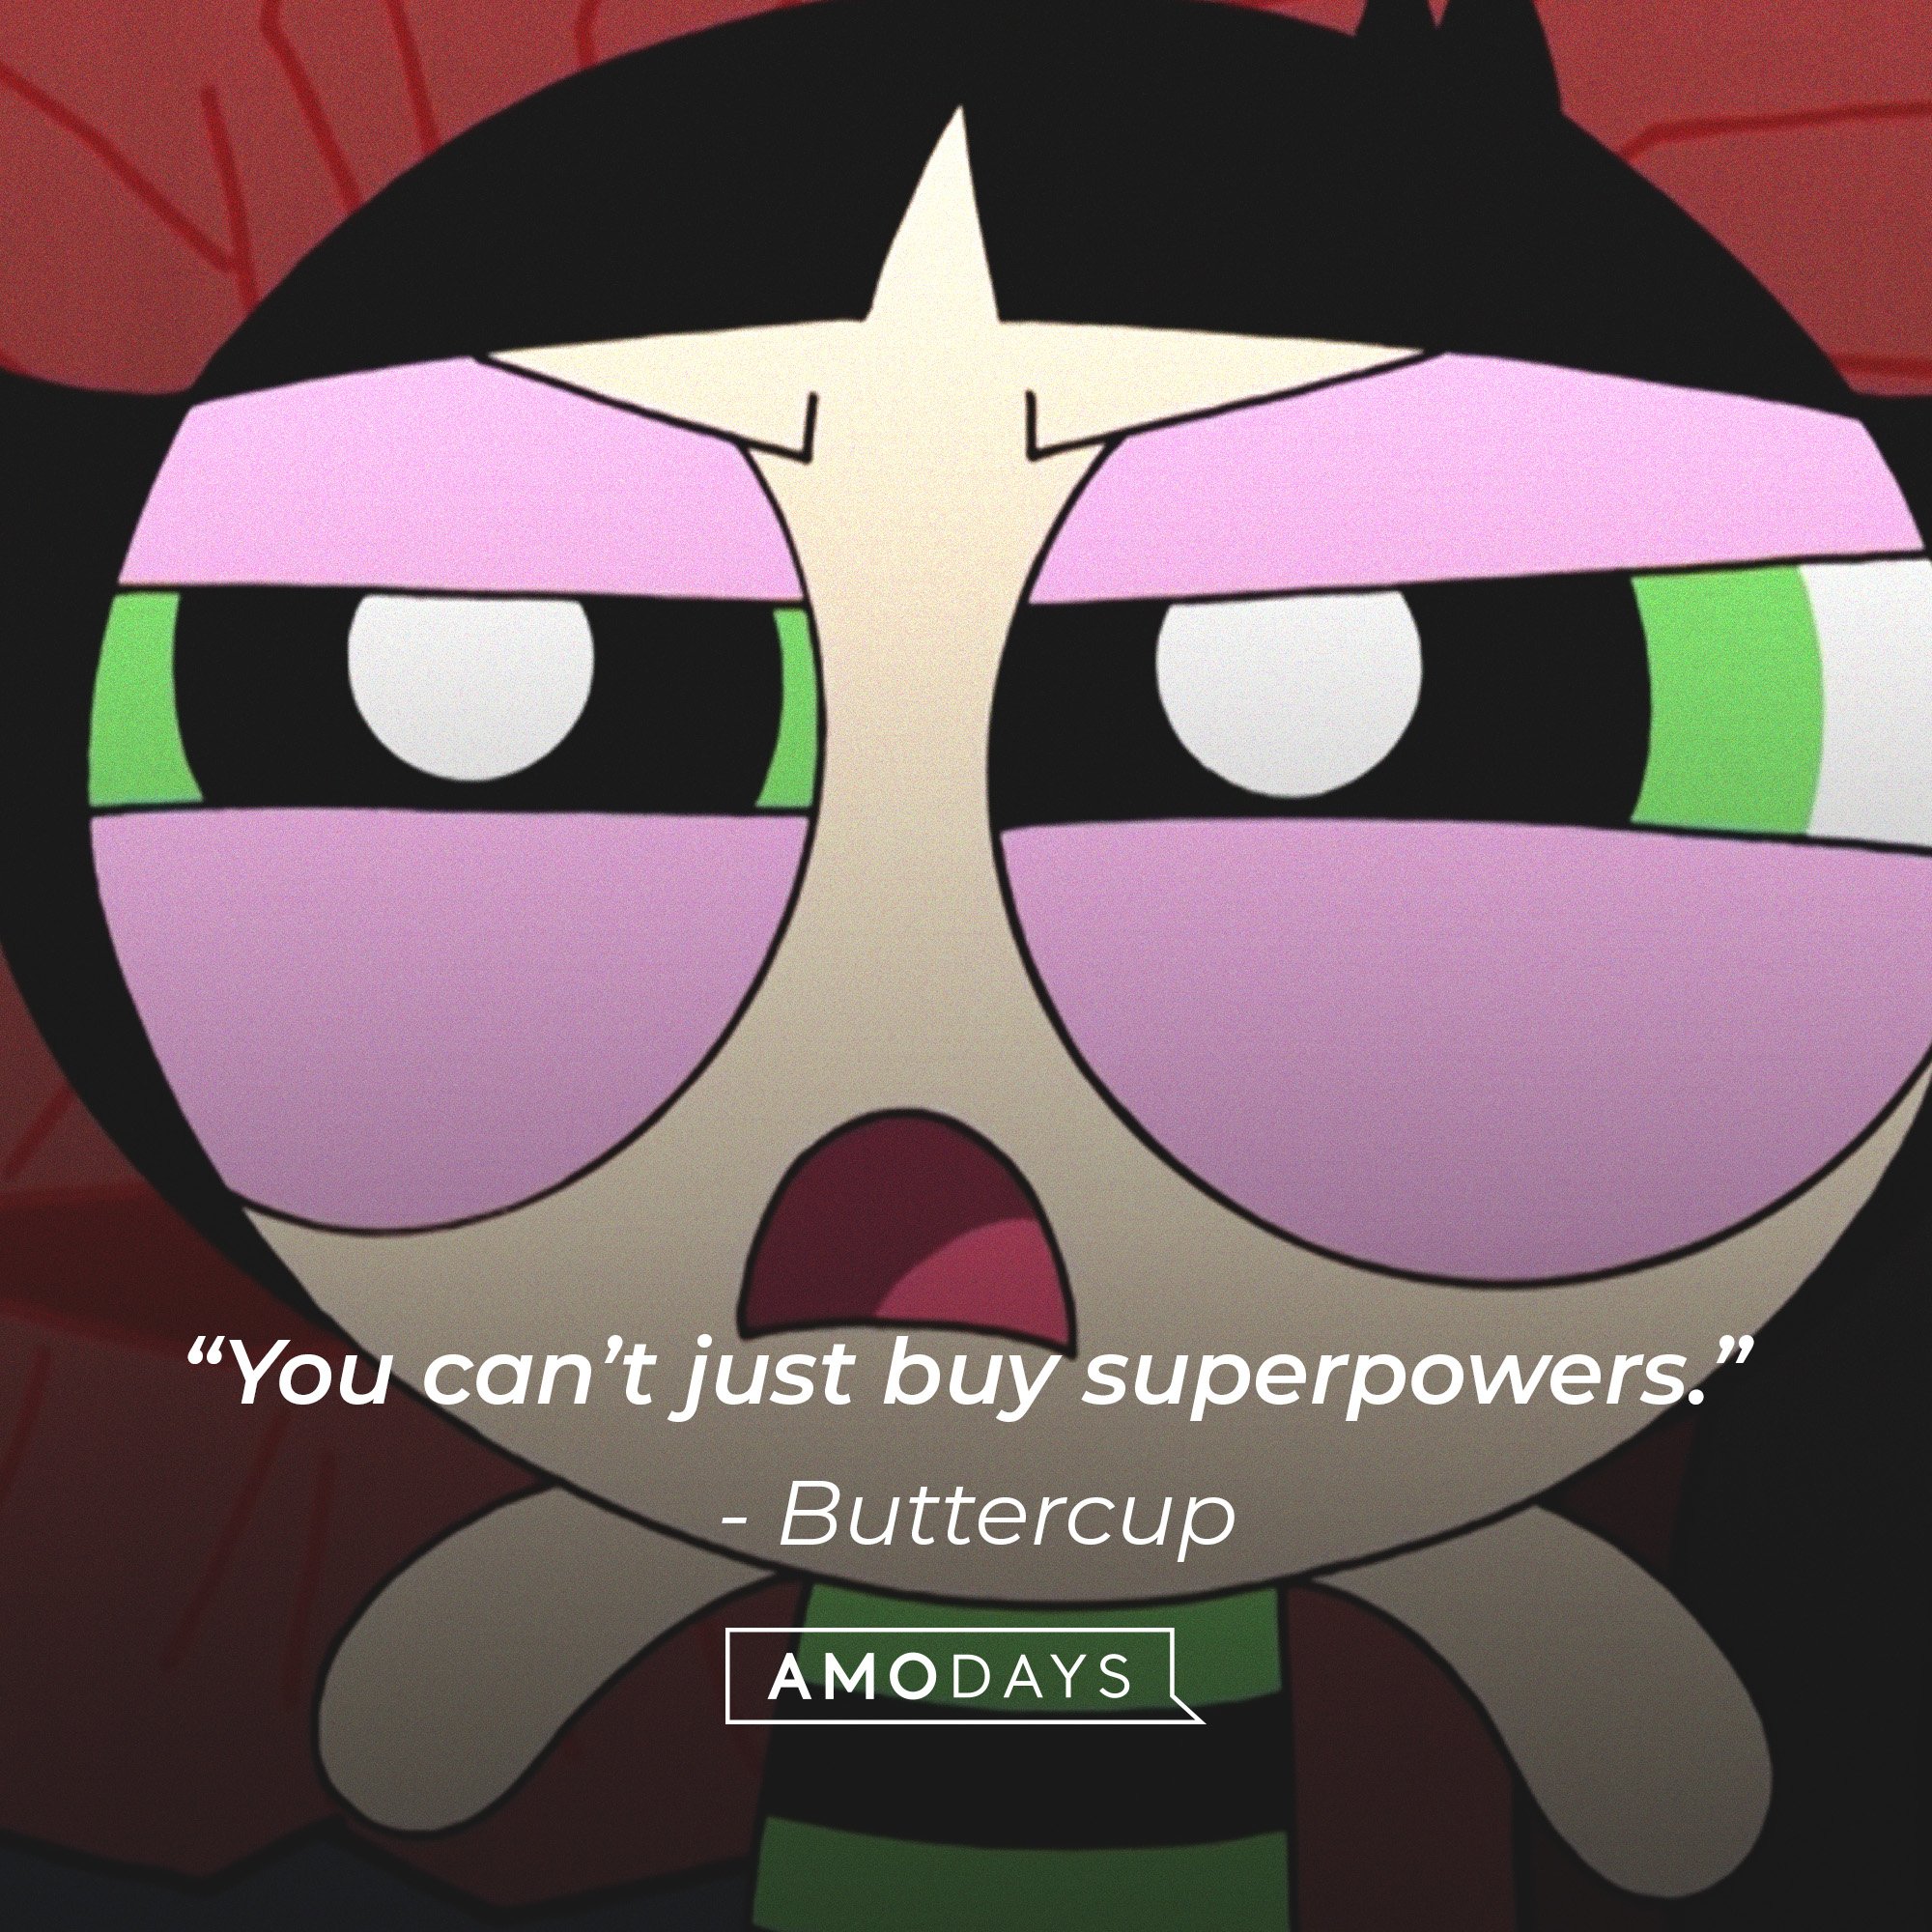 Buttercup’s quote: “You can’t just buy superpowers.”  | Image: AmoDays